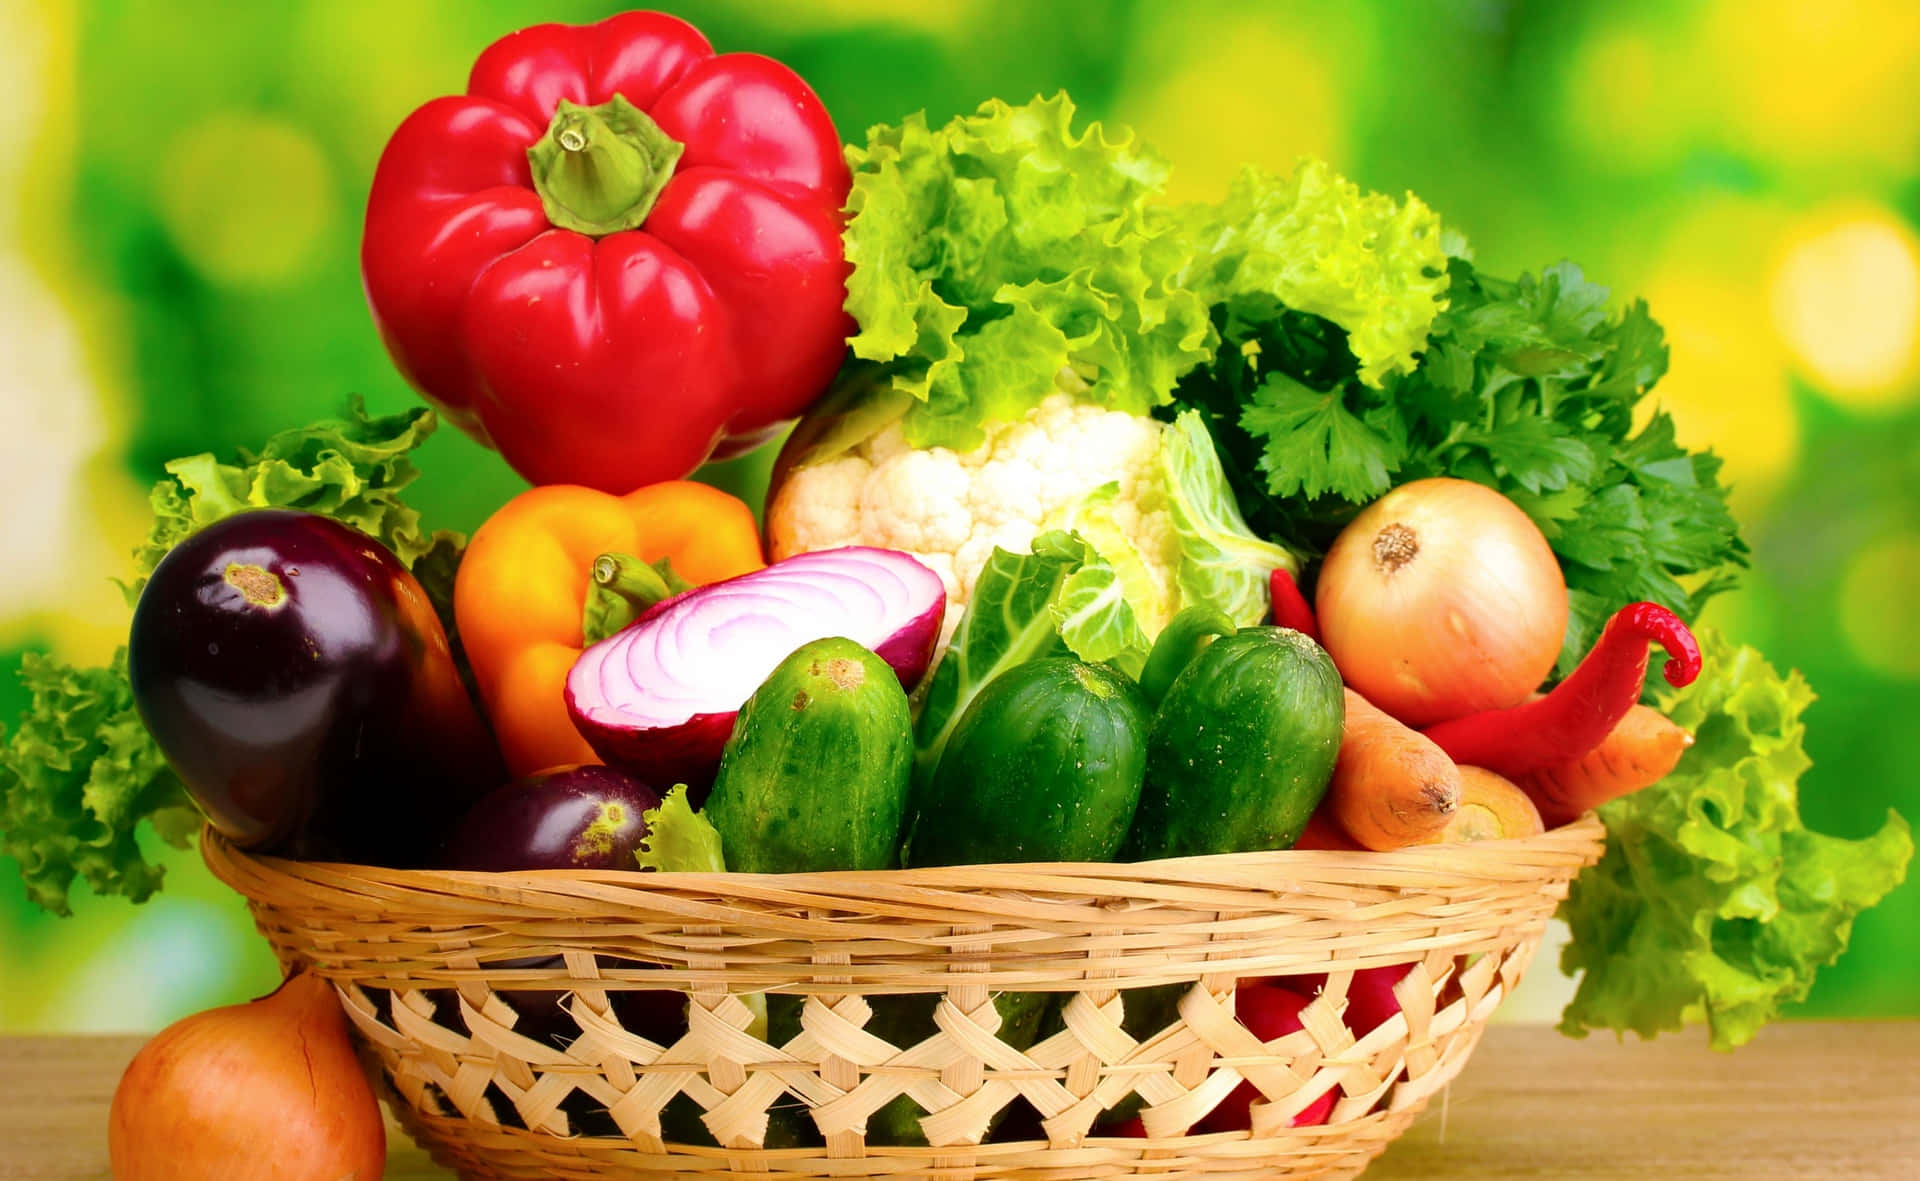 A Colorful Variety of Fresh Fruits and Vegetables